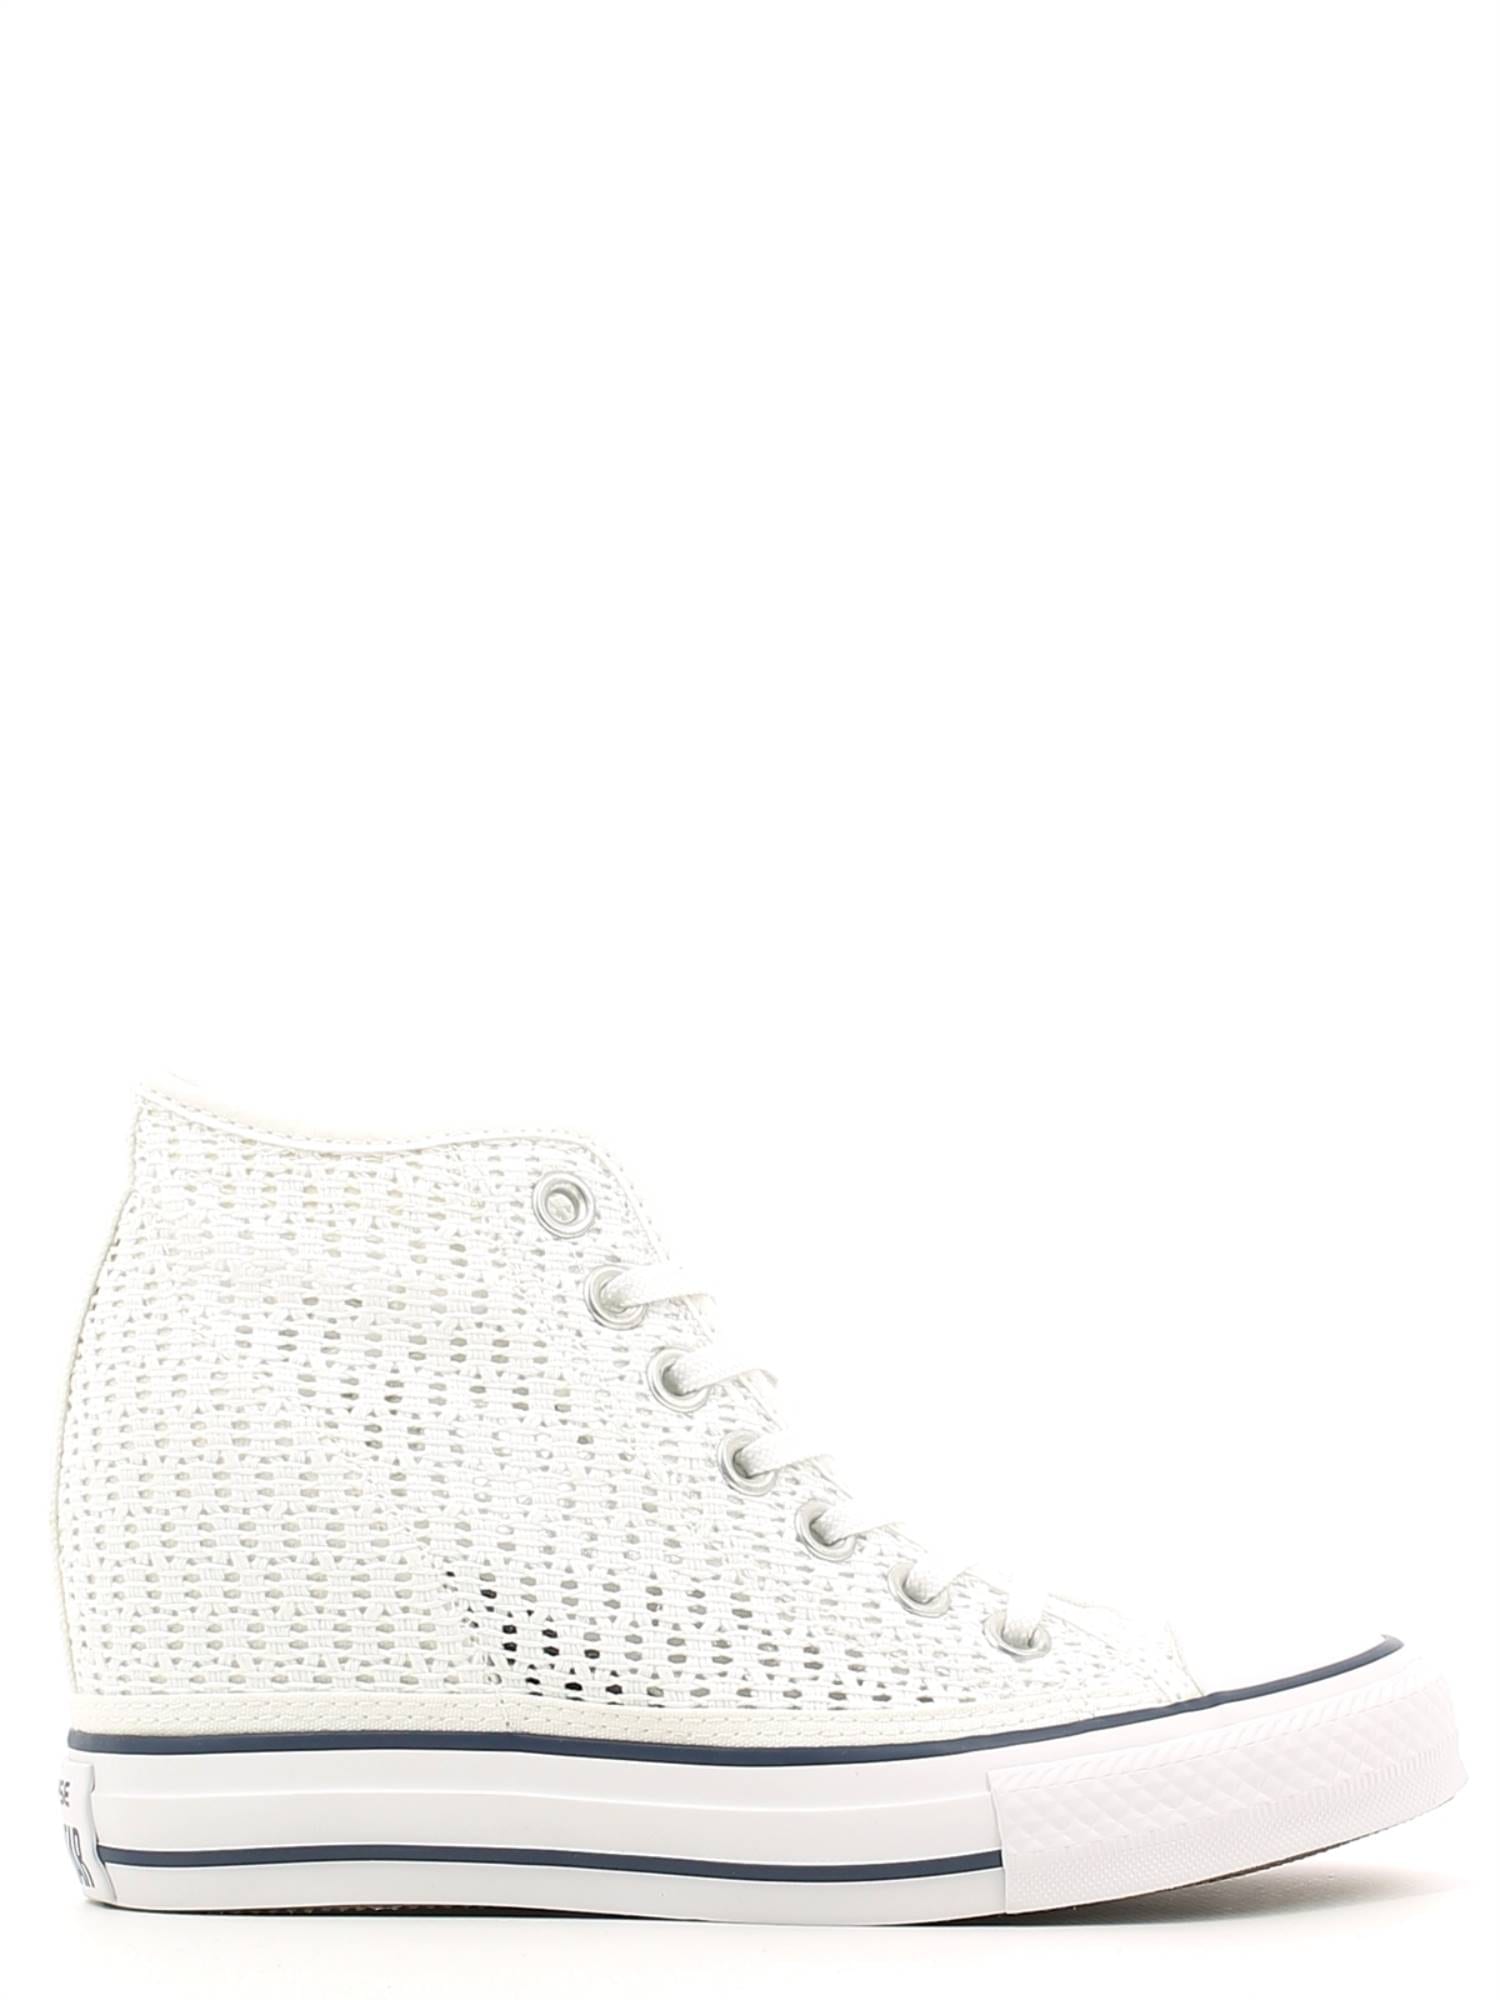 converse all star mid lux nere